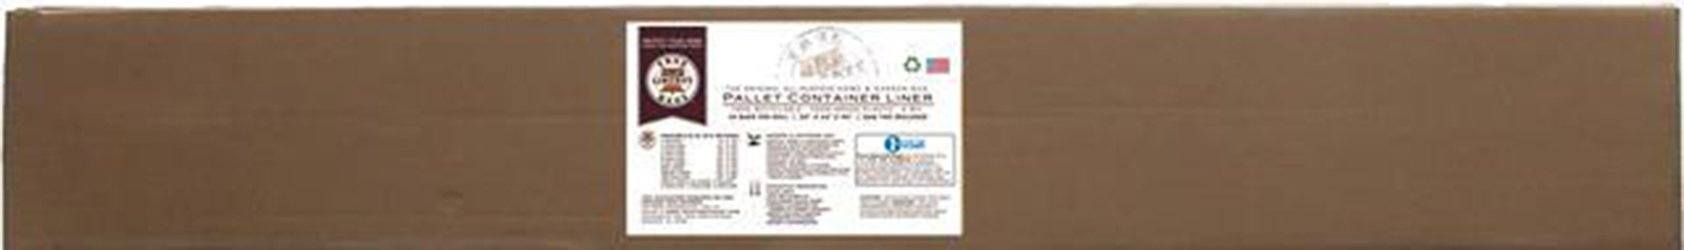 True Liberty - Pallet Container 55" X 44" X 90", 30 Bags/Roll, White Hydroponic Center True Liberty Bags 